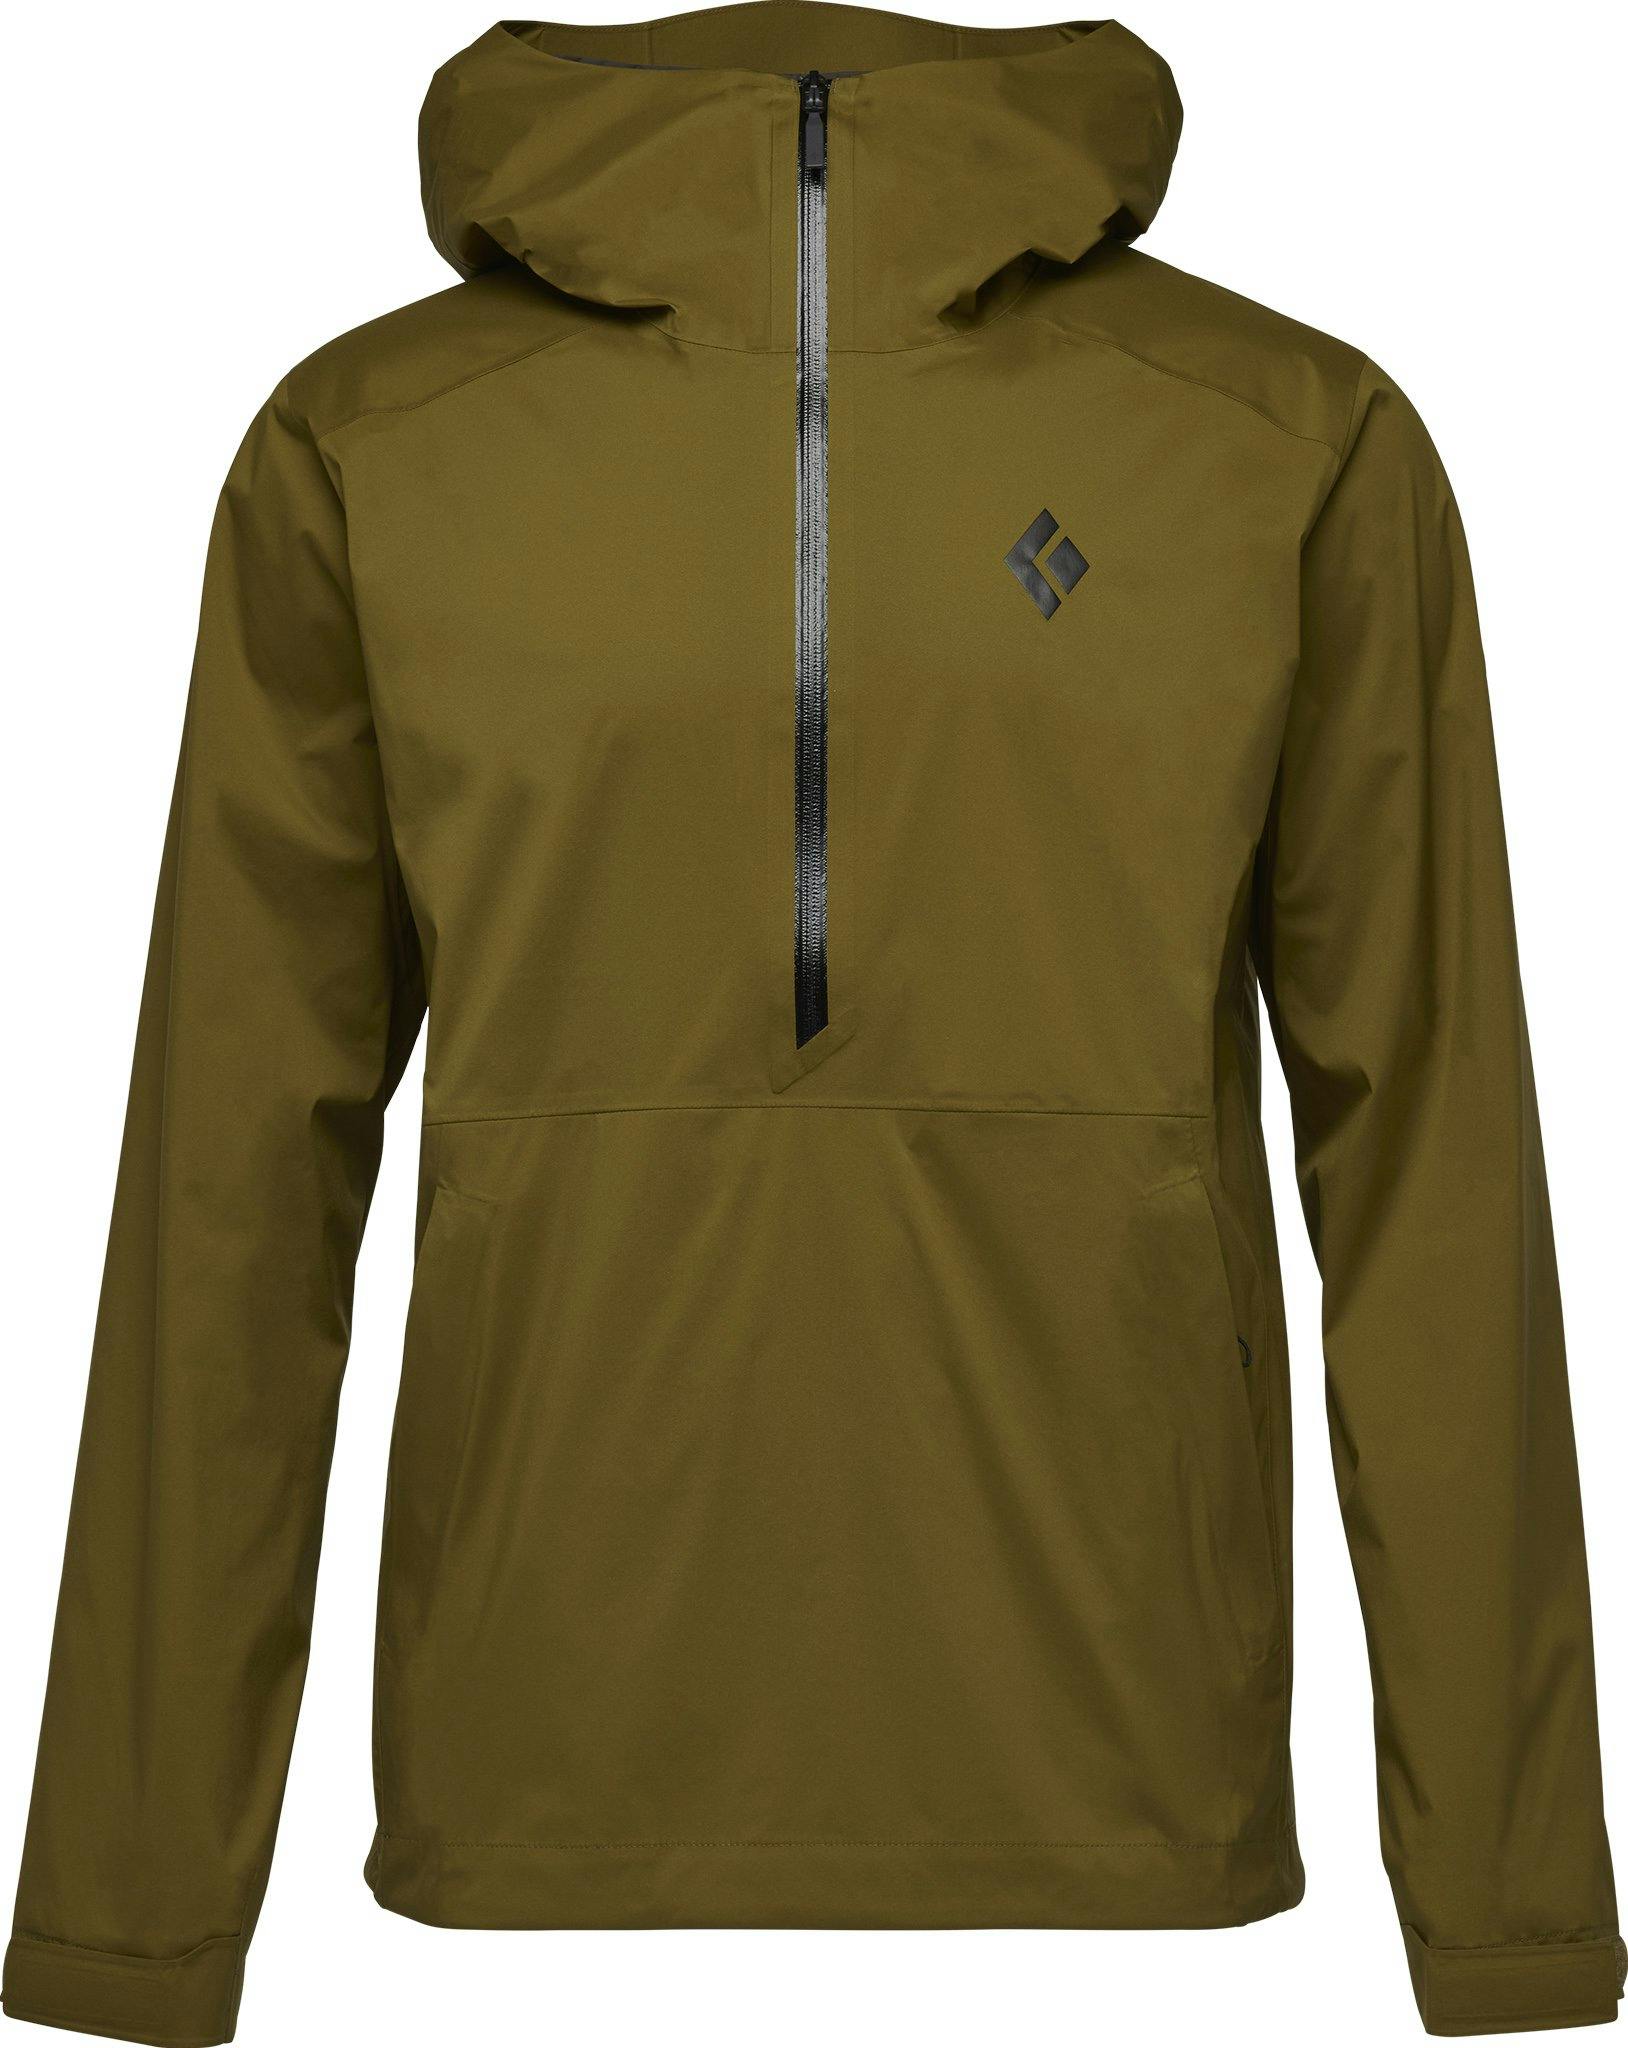 Product image for Stormline Stretch Anorak - Men's